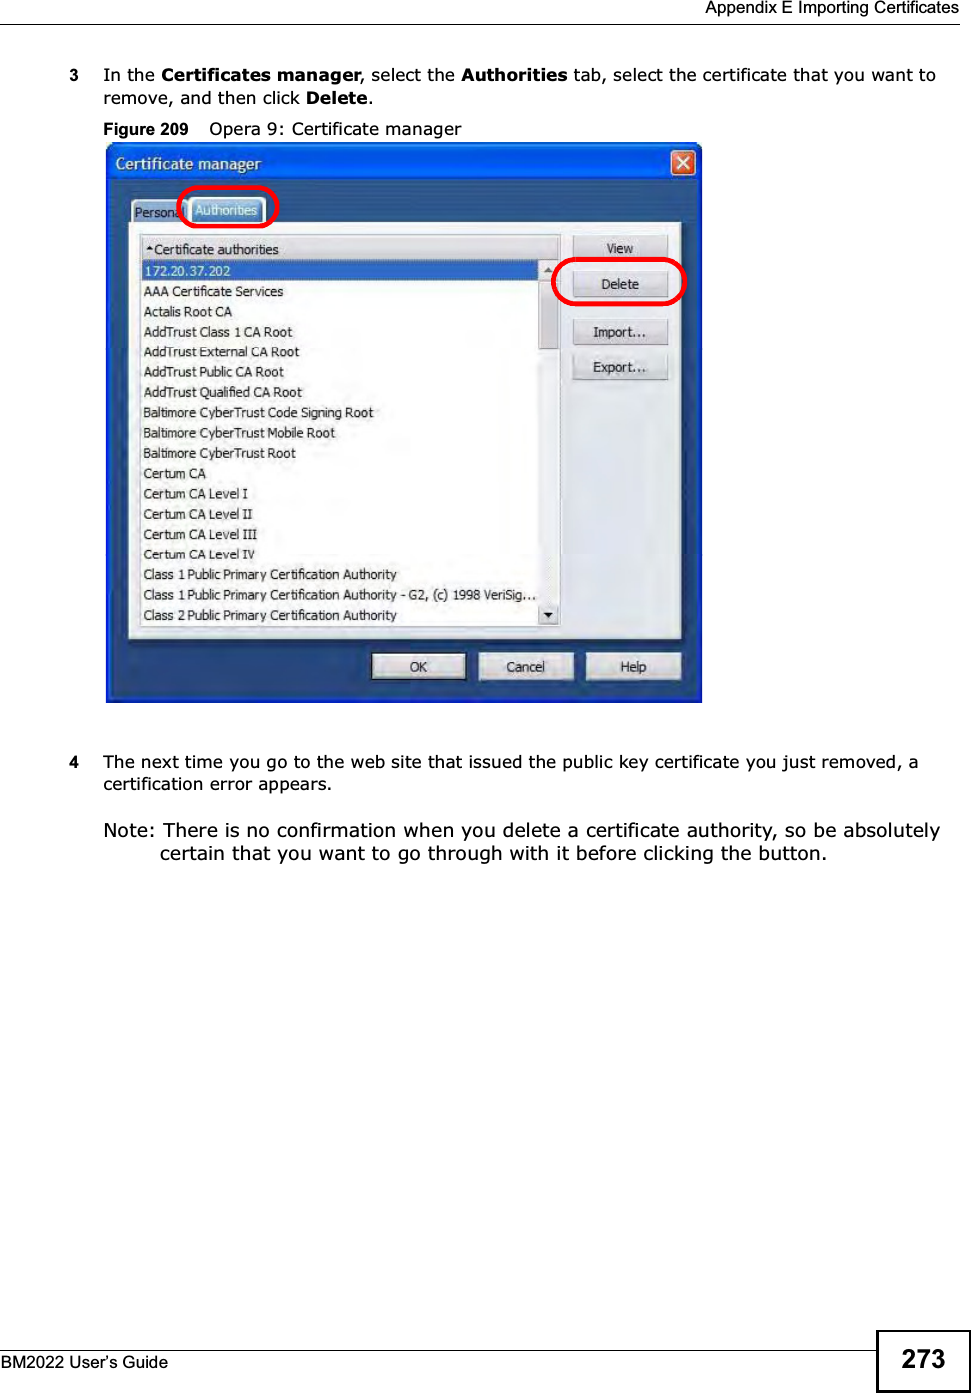  Appendix E Importing CertificatesBM2022 Users Guide 2733In the Certificates manager, select the Authorities tab, select the certificate that you want to remove, and then click Delete.Figure 209    Opera 9: Certificate manager4The next time you go to the web site that issued the public key certificate you just removed, a certification error appears.Note: There is no confirmation when you delete a certificate authority, so be absolutely certain that you want to go through with it before clicking the button.